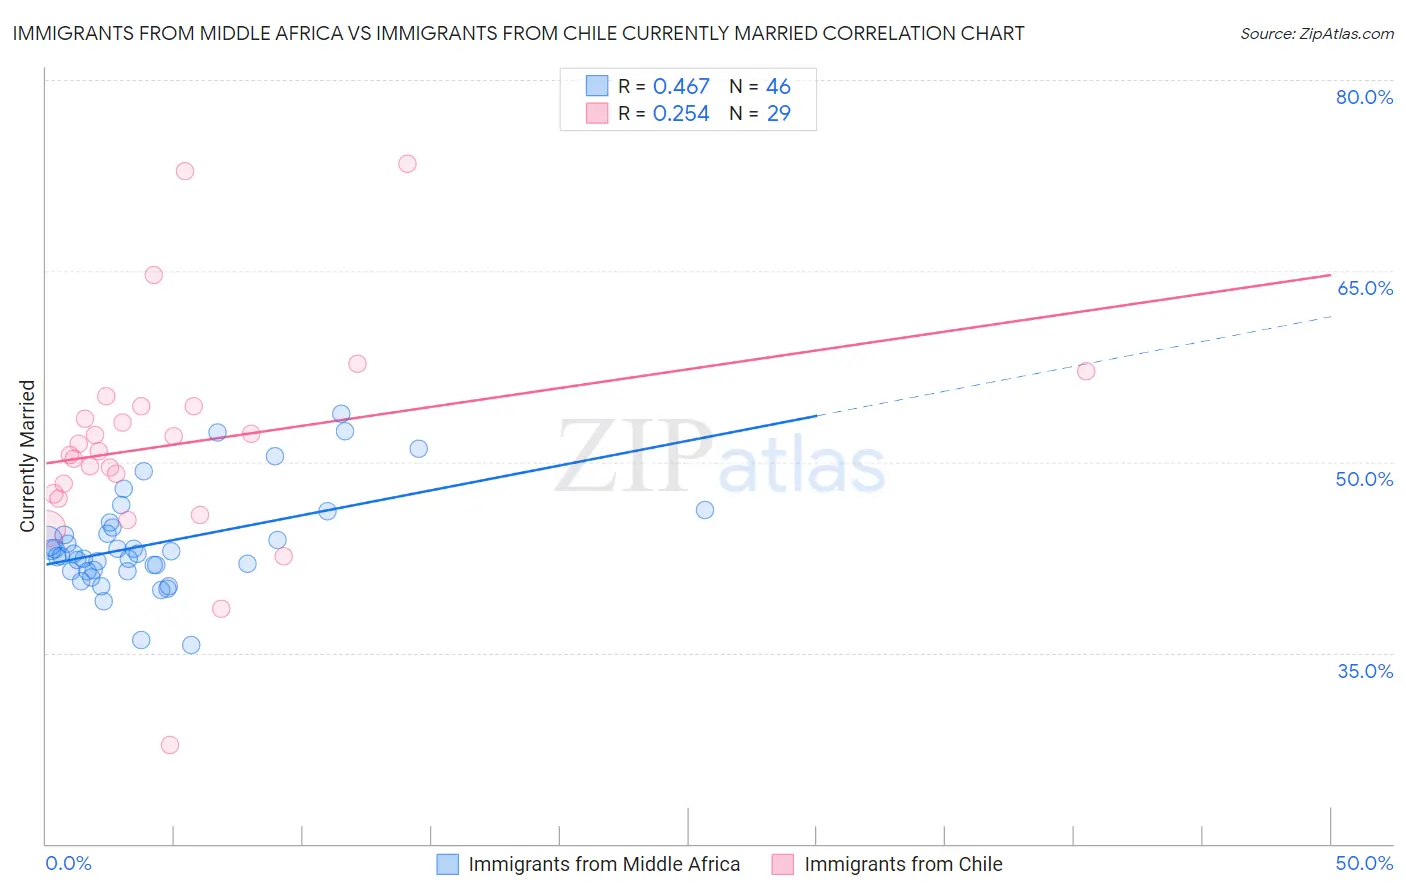 Immigrants from Middle Africa vs Immigrants from Chile Currently Married